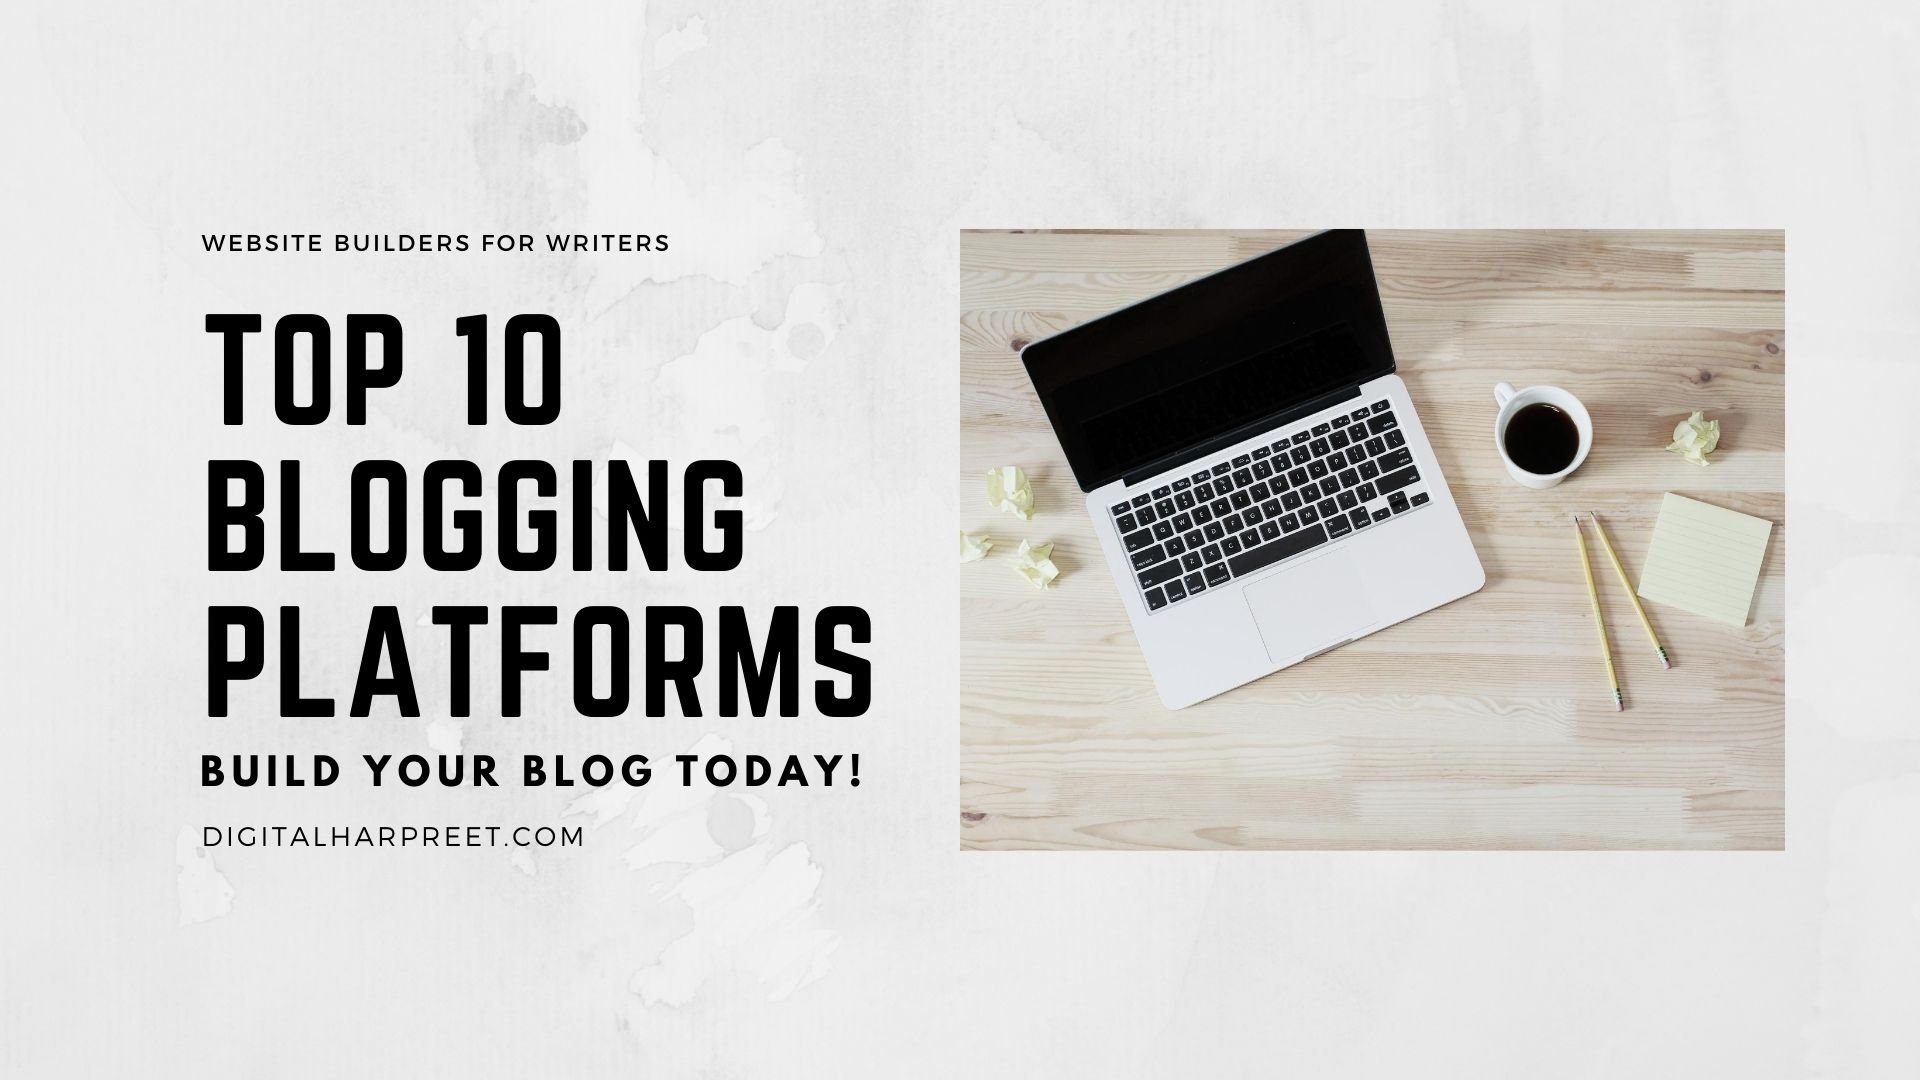 Top 10 Blogging Platforms and Website Builders for Writers | DH